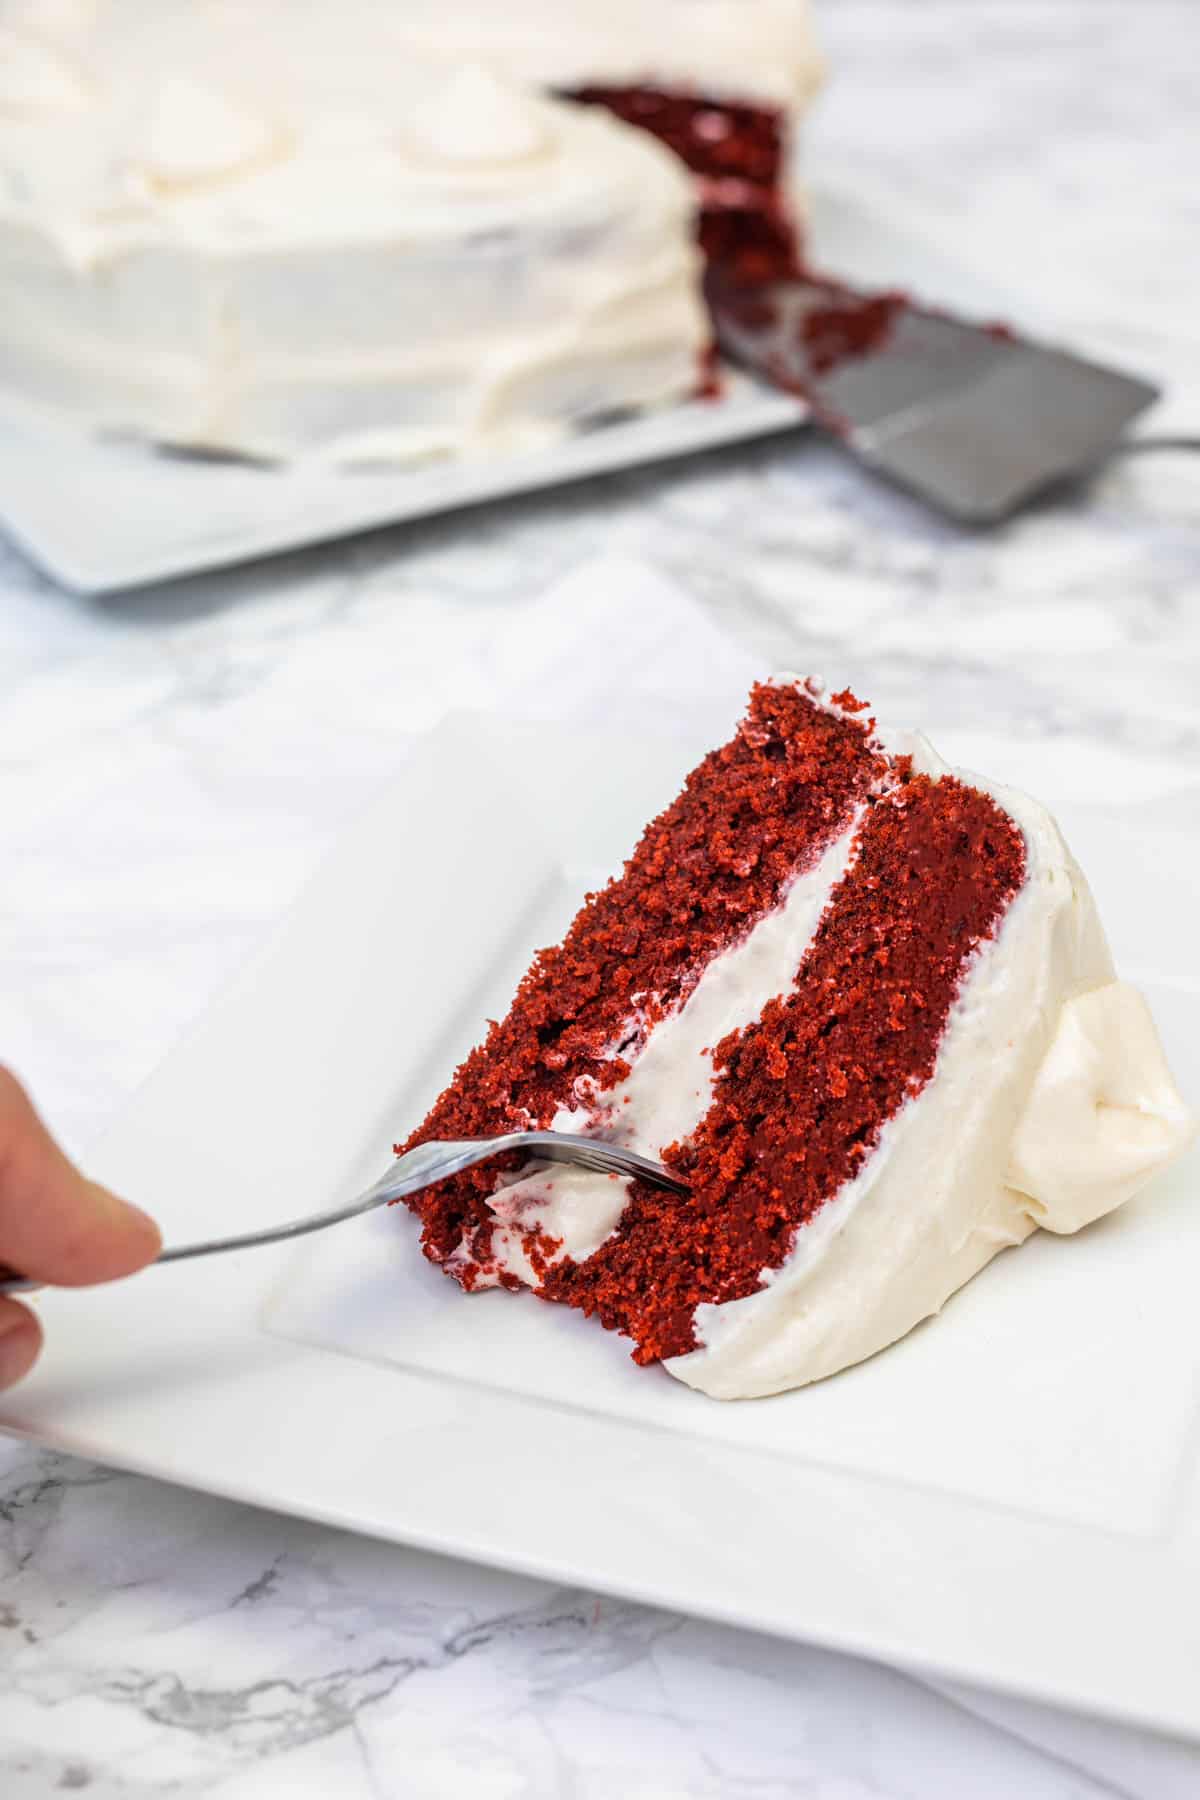 Hand sticking fork into slice of vegan red velvet cake with cream cheese frosting on white plate with cake in background